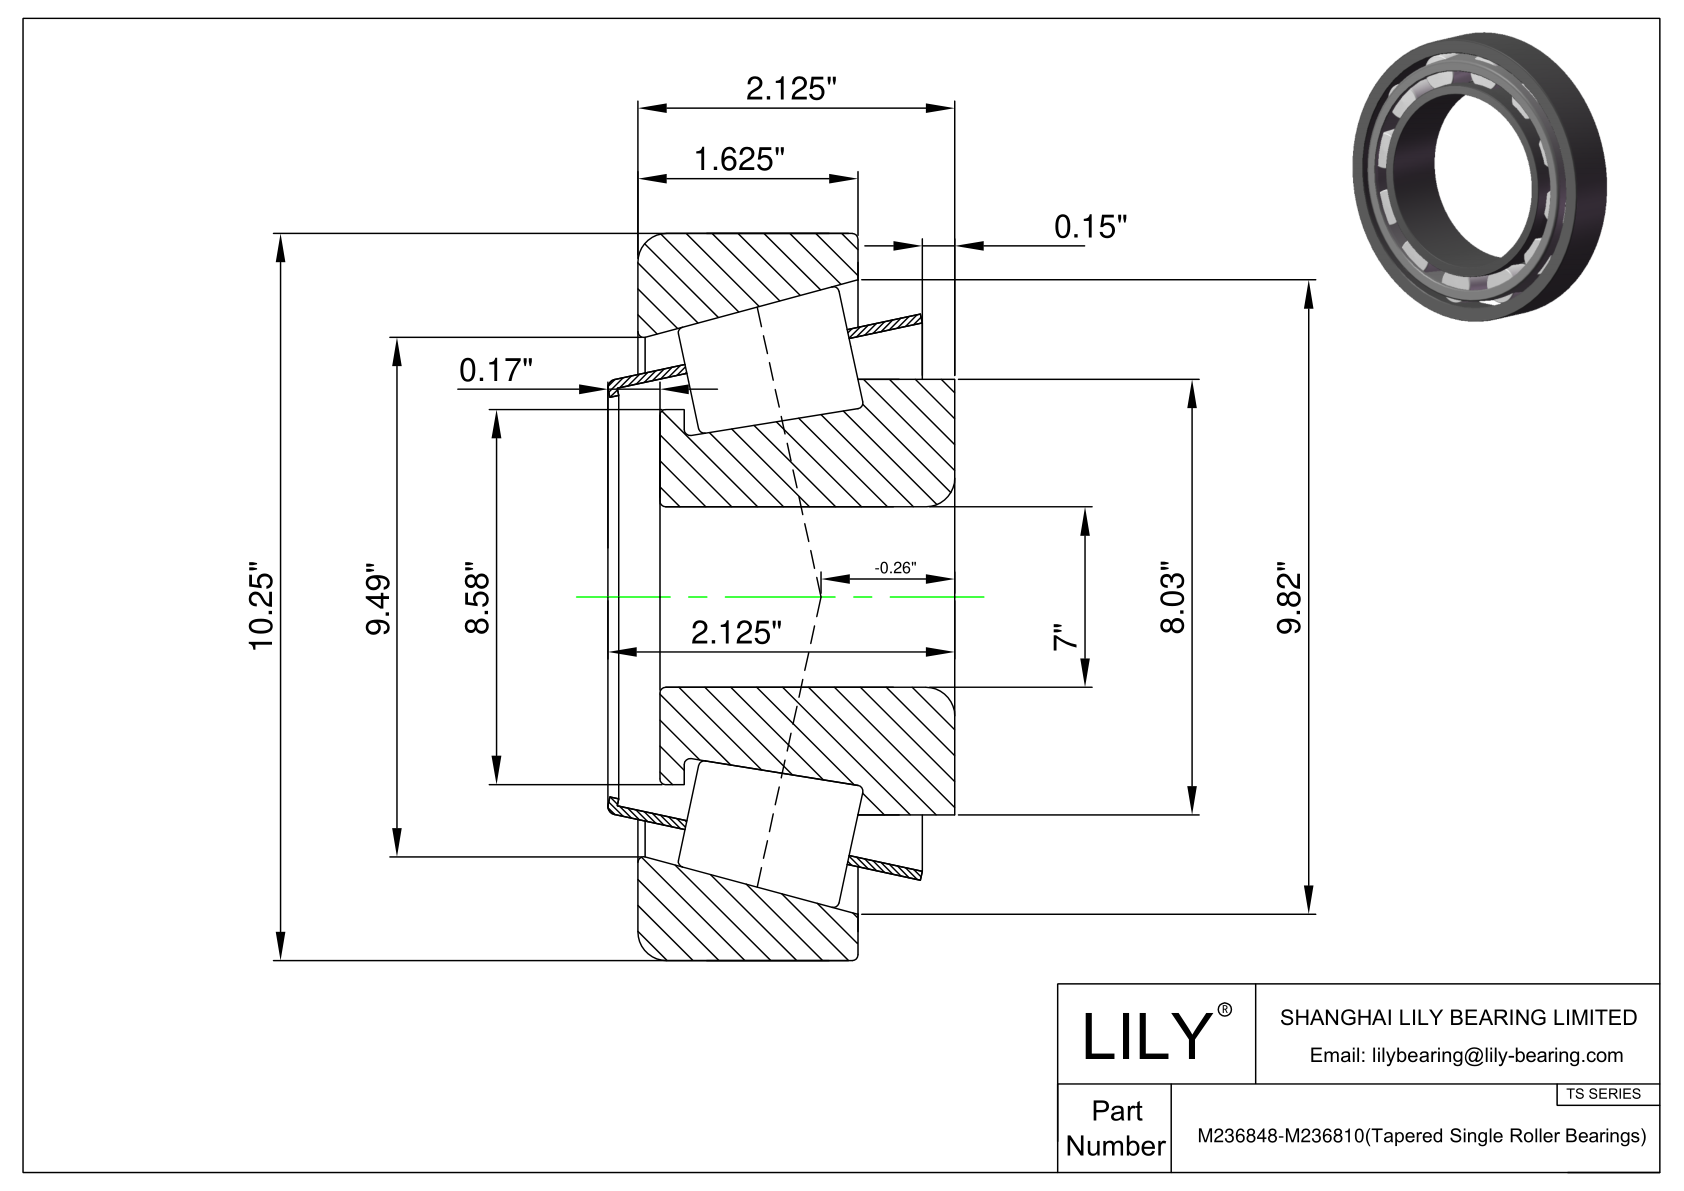 M236848-M236810 TS (Tapered Single Roller Bearings) (Imperial) cad drawing